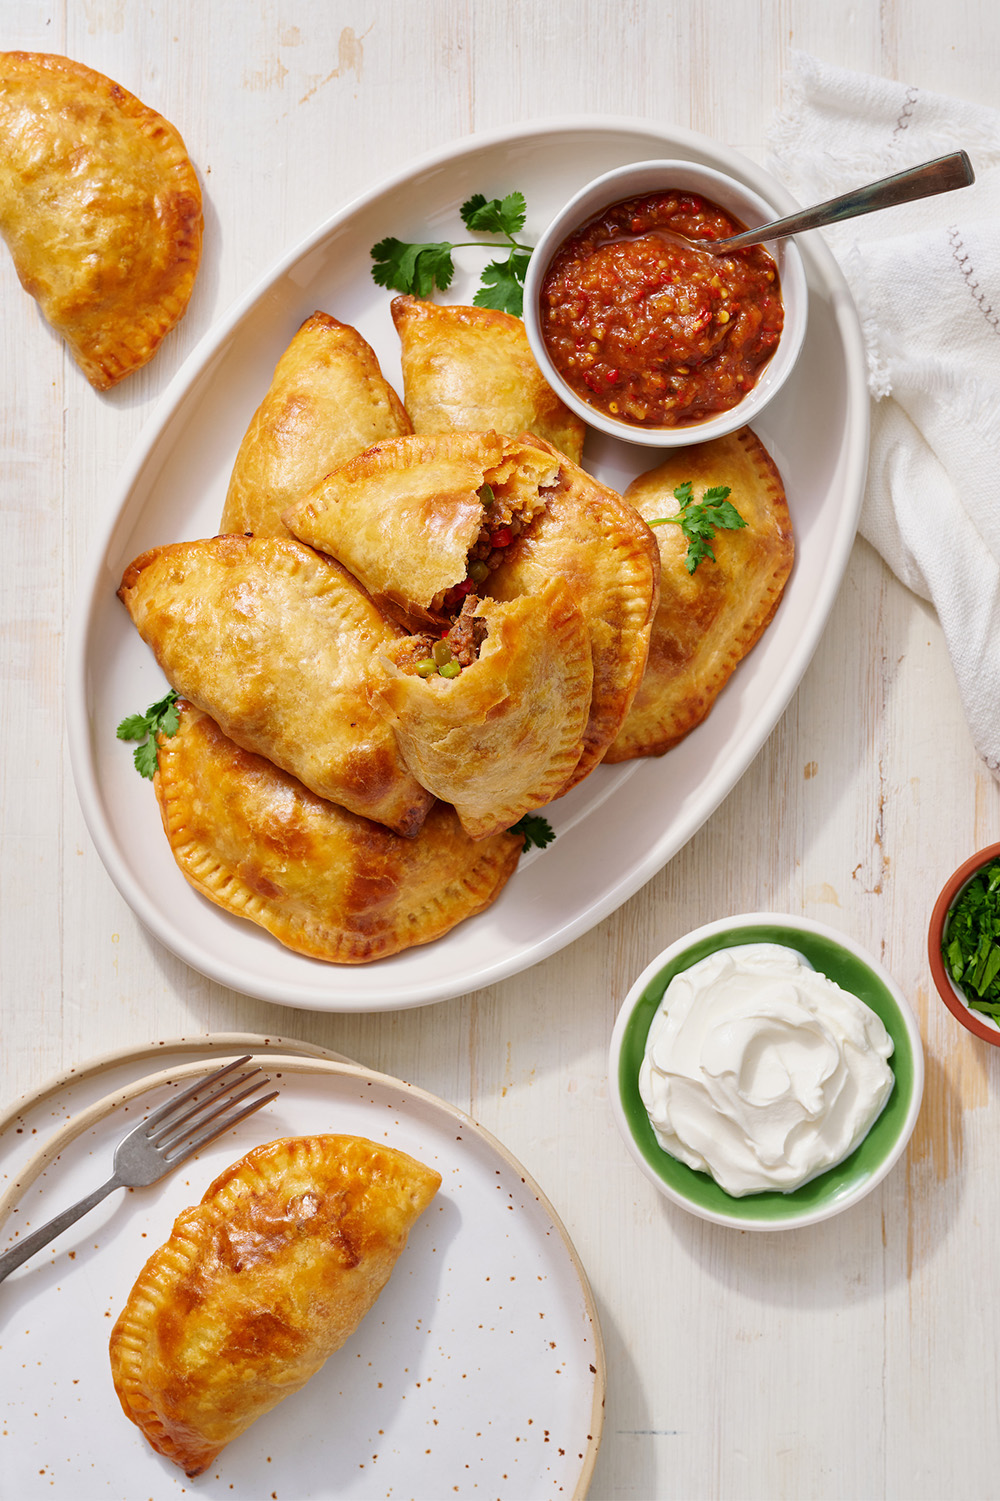 beef empanada on a plate with some salsa and sour cream for dipping